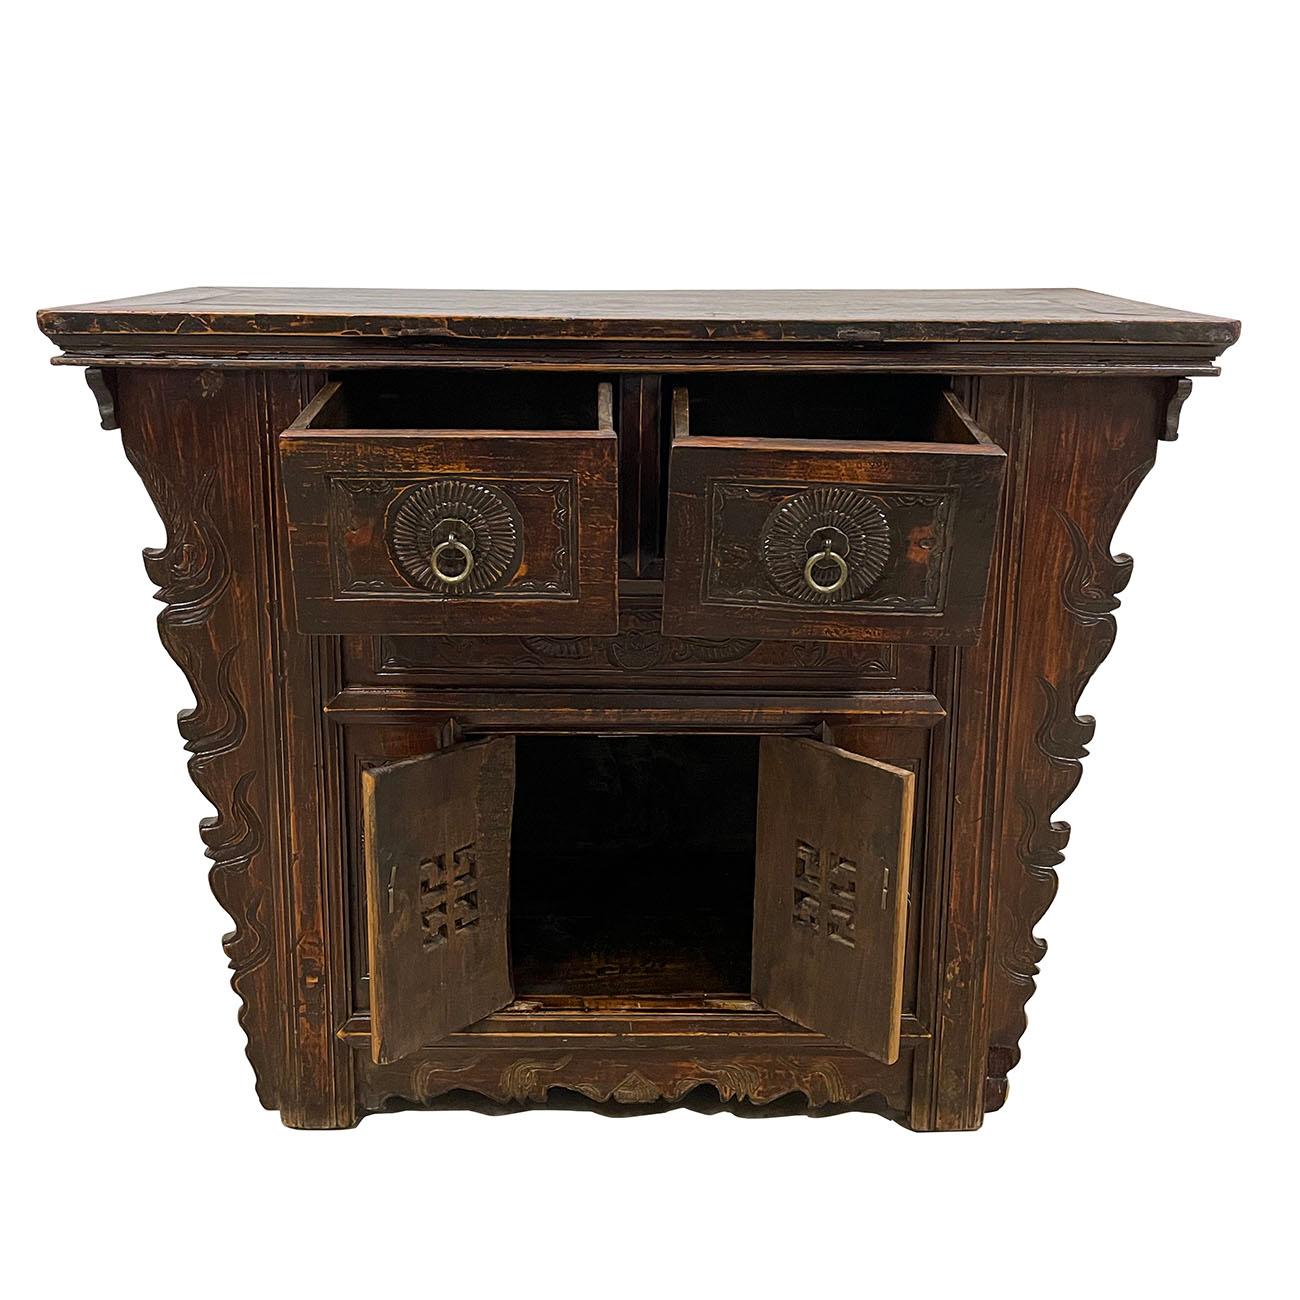 Chinese Export 19th Century Antique Chinese Qing Dynasty Carved Coffer Table/Sideboard For Sale